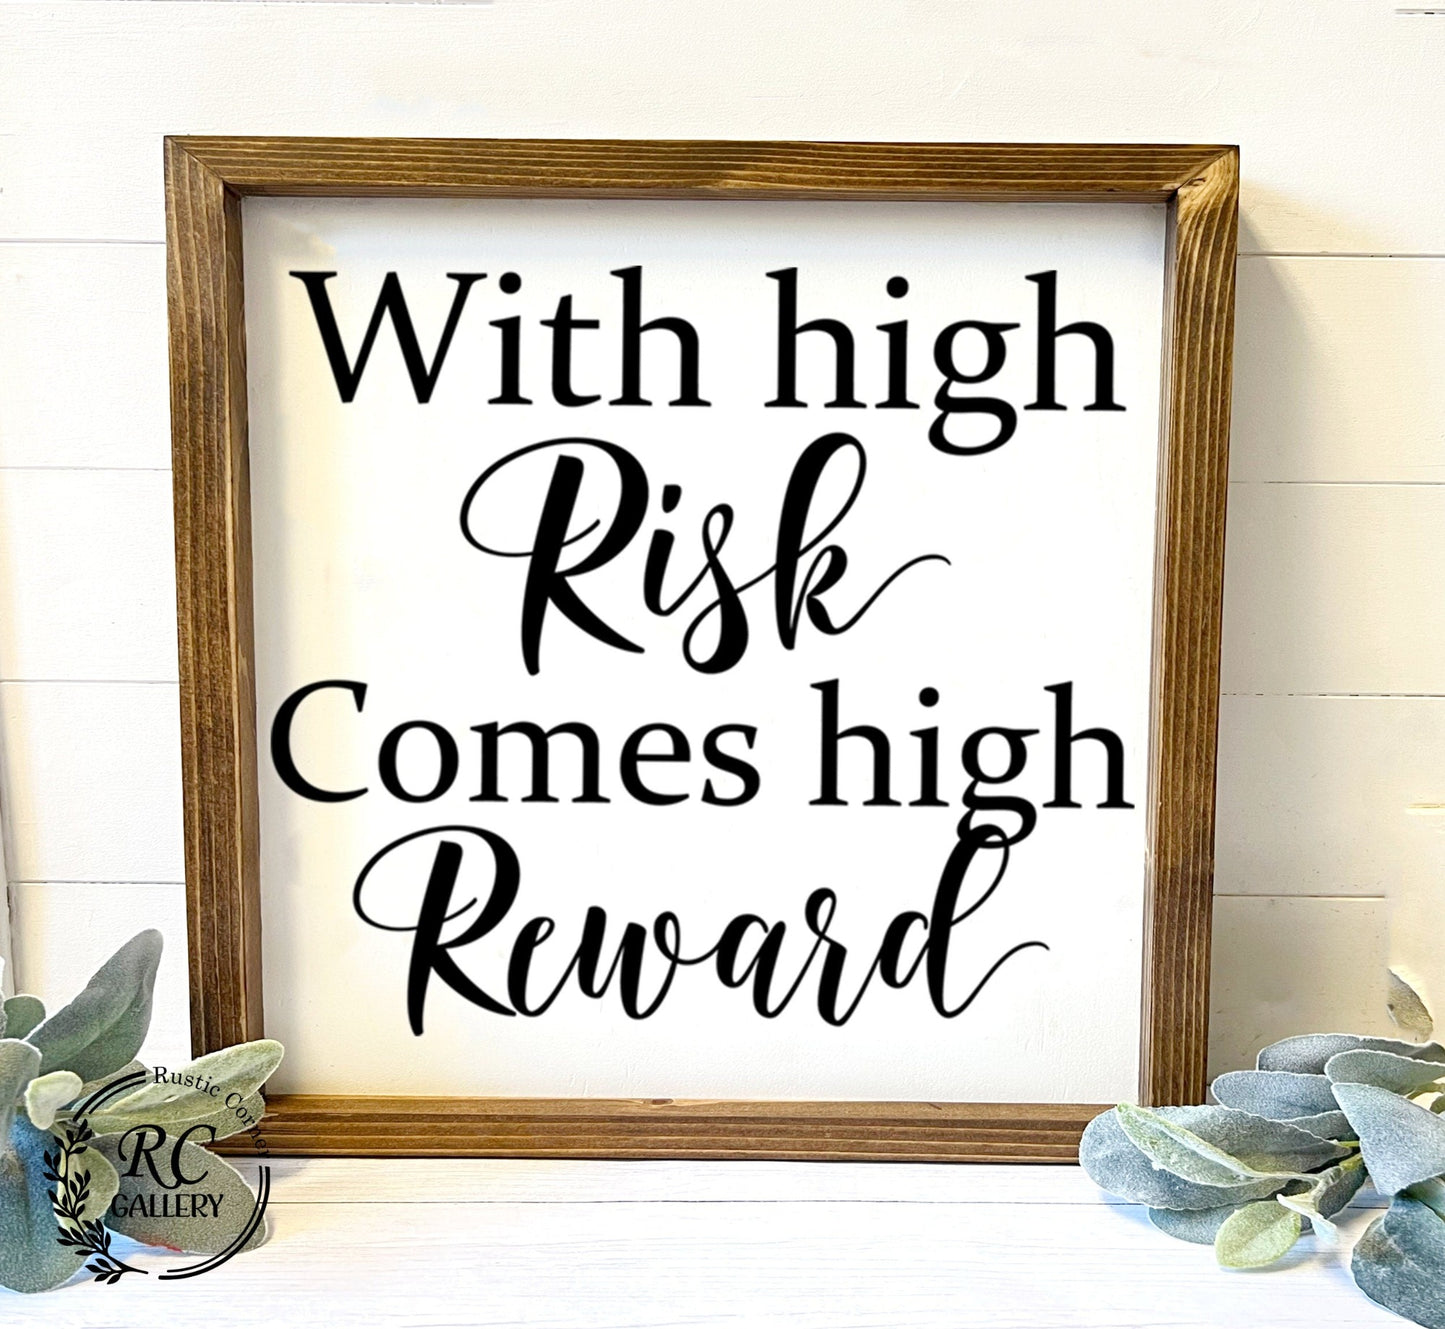 With high Risk comes high Reward motivational wood sign.